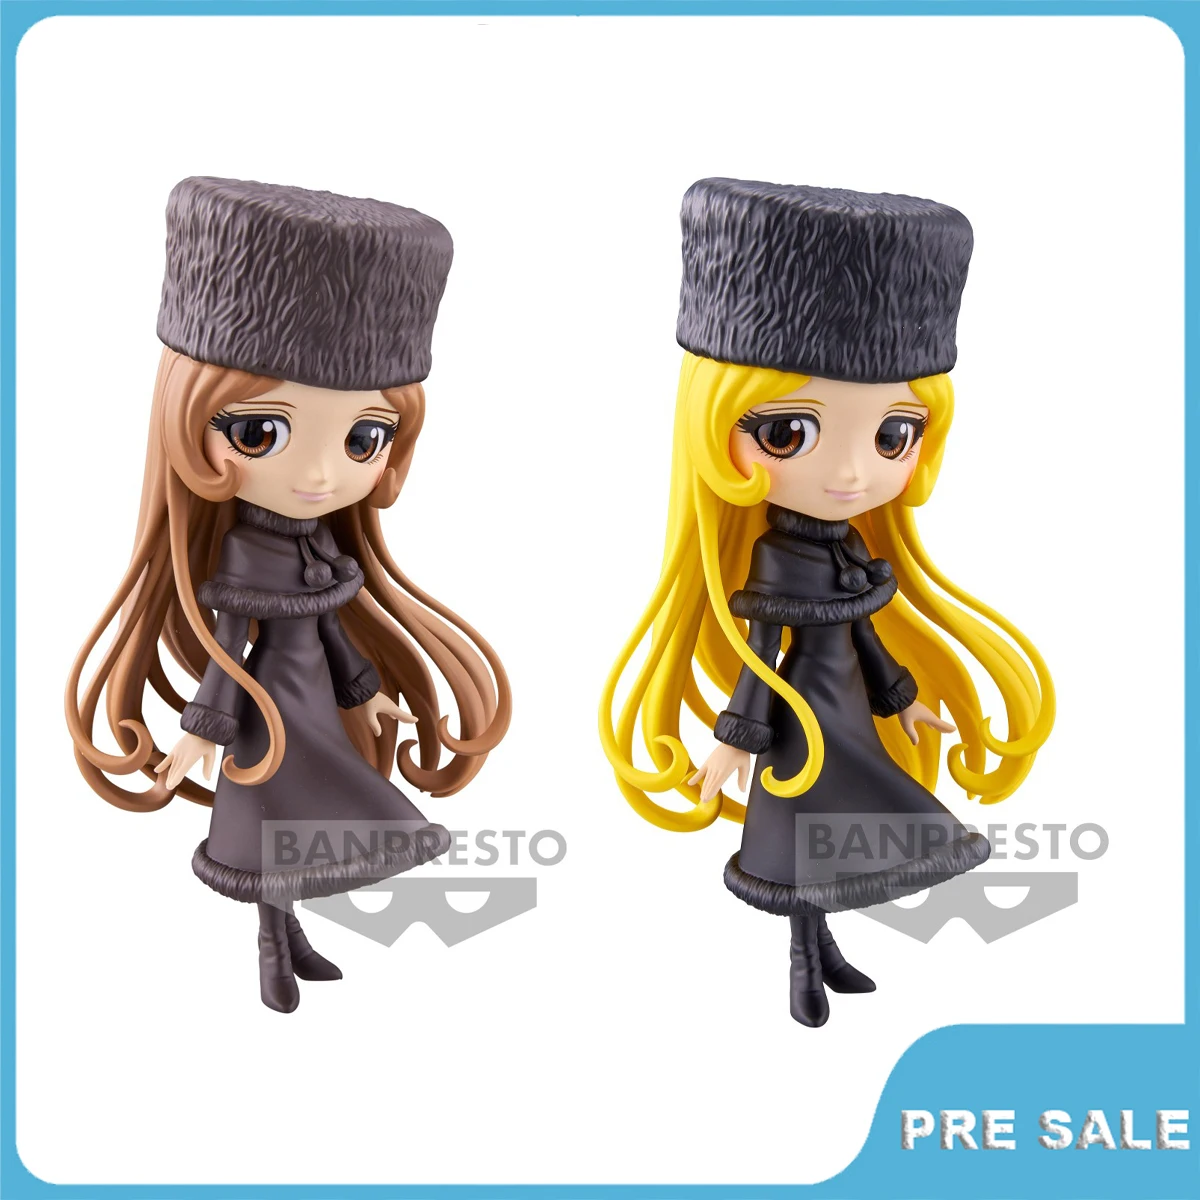 

Pre Sale Galaxy Express 999 Anime Maetel Action Figure Q Posket Original Hand Made Toy Peripherals Collection Gifts for Kids